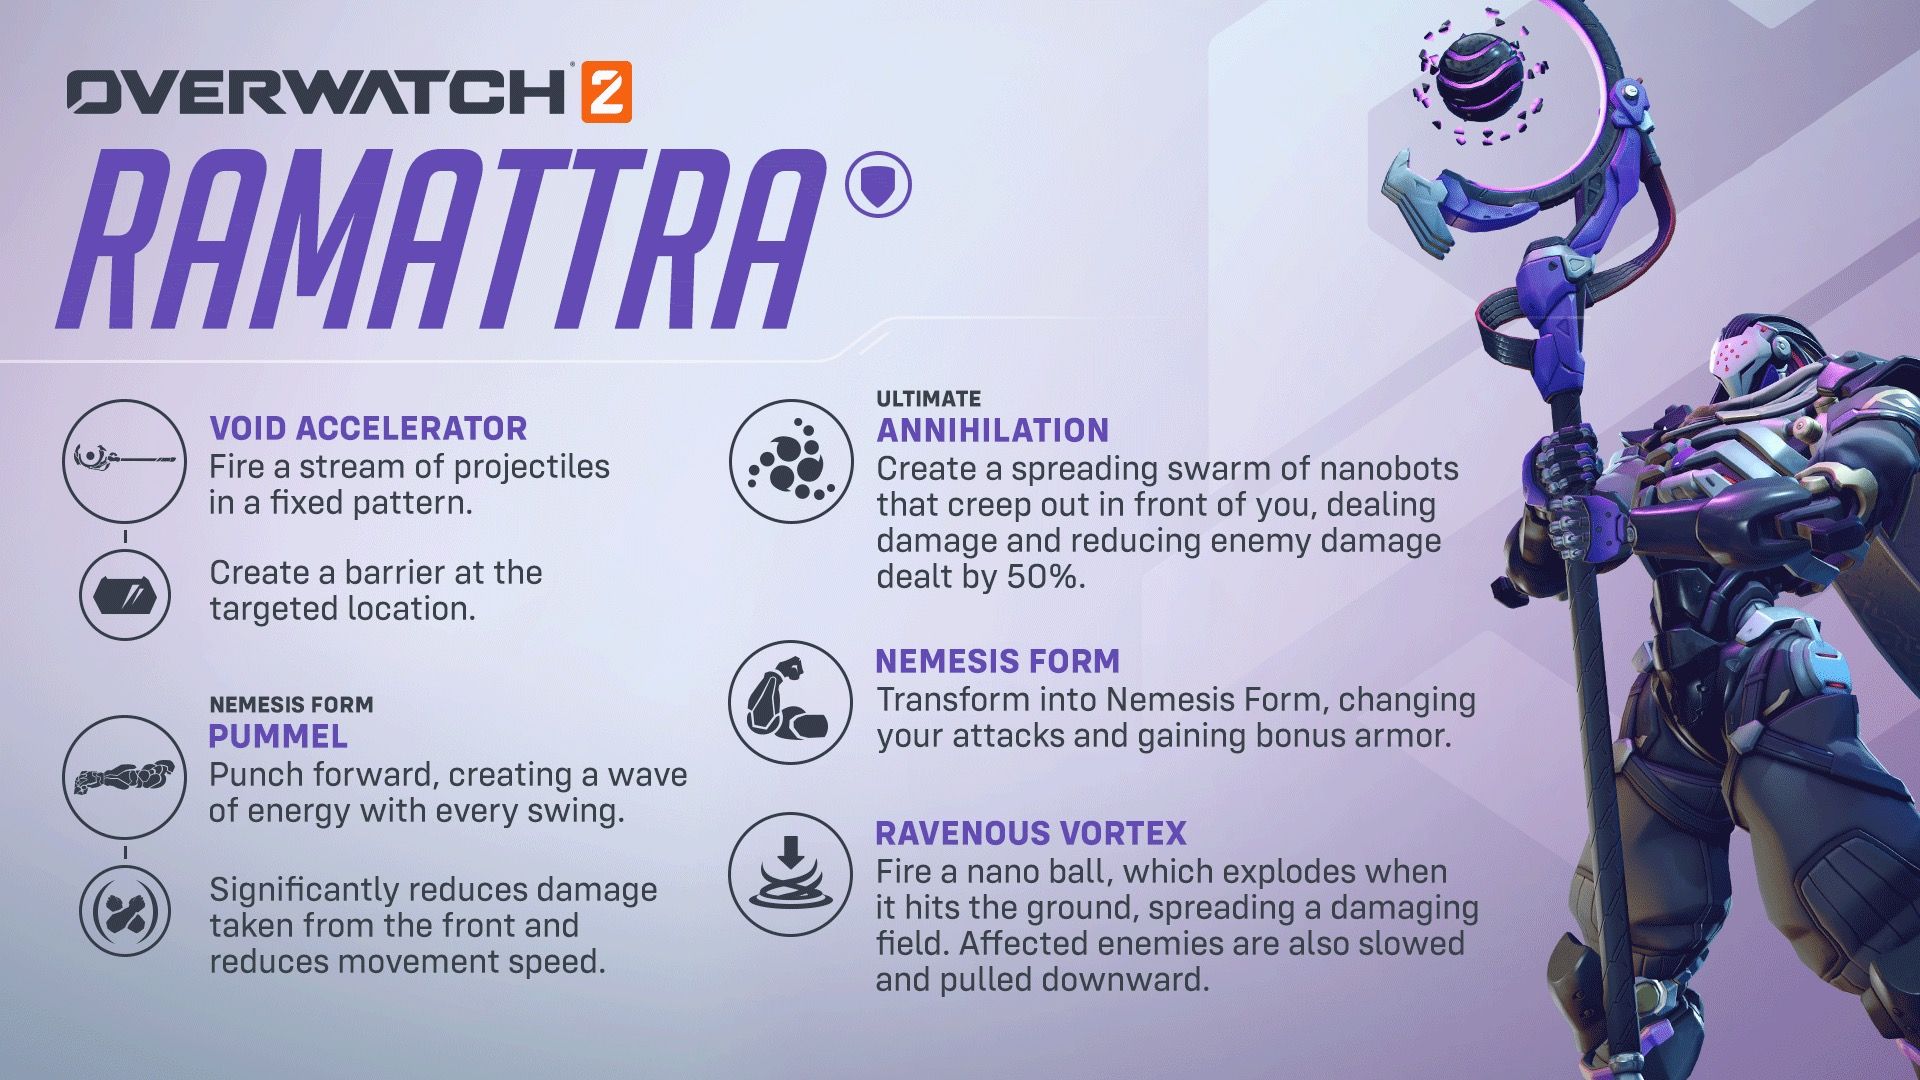 Ramattra, new Overwatch hero abilities have been revealed by the official Overwatch Twitter account's tweet